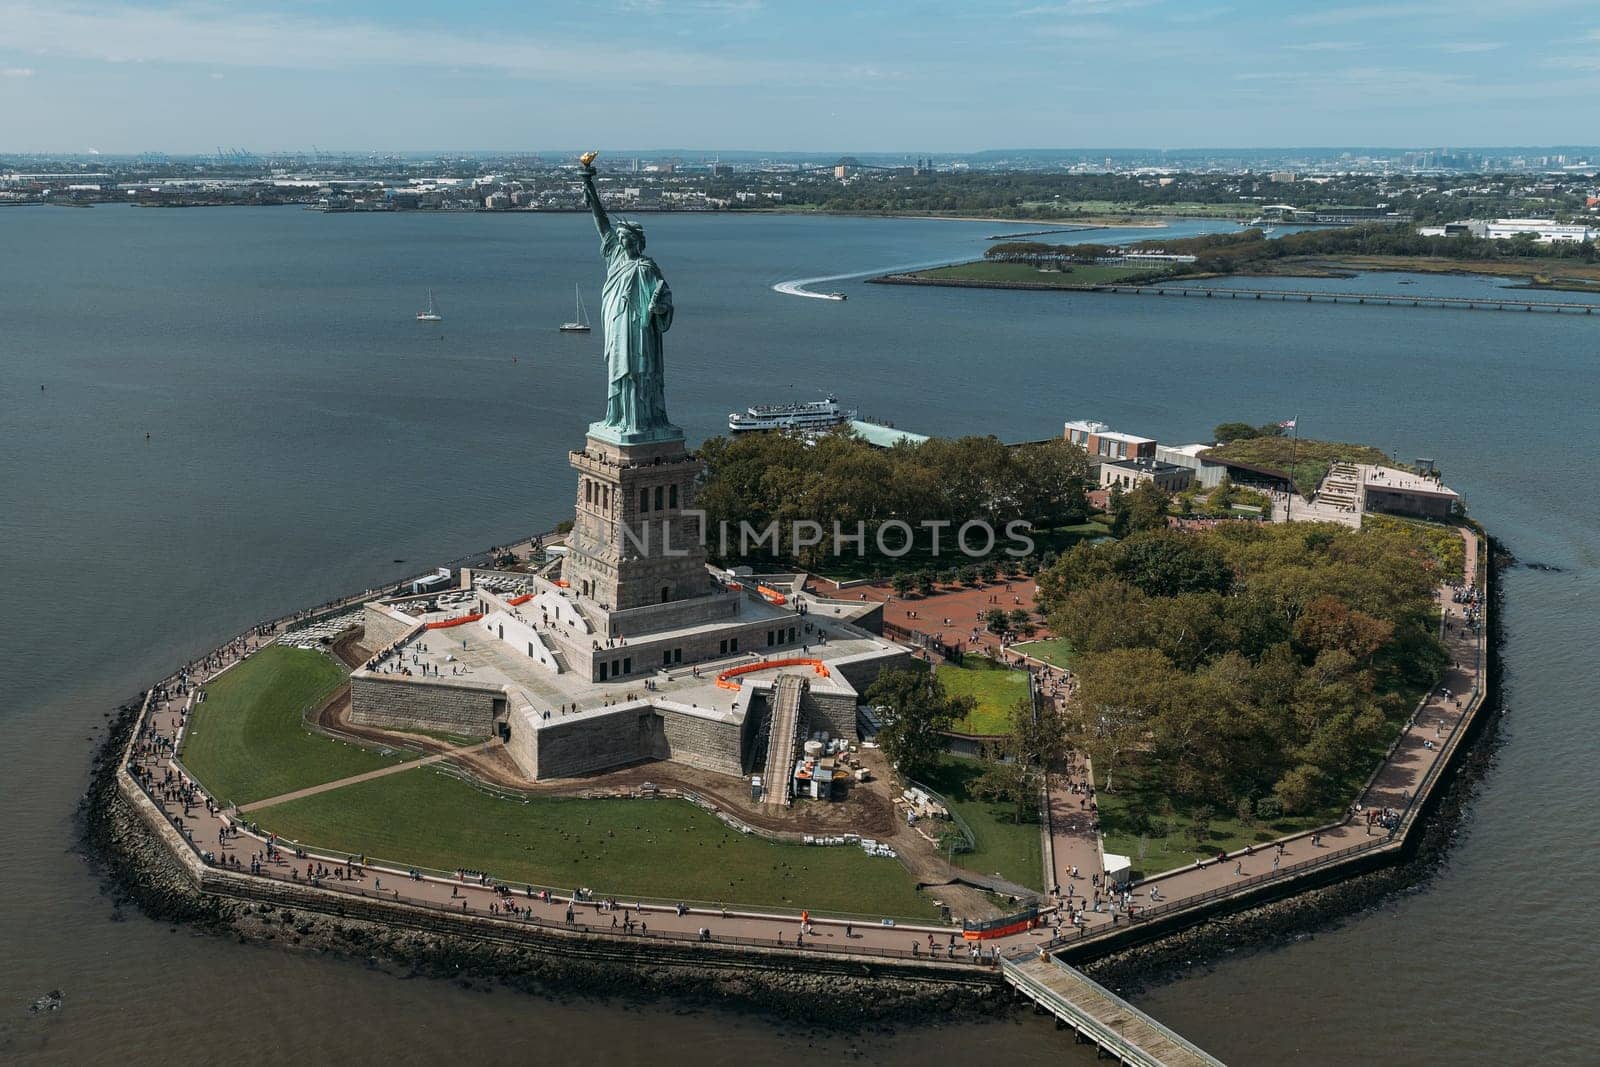 A stunning aerial view of the Statue of Liberty standing proudly on Liberty Island, surrounded by the waters of New York Harbor. The iconic monument is a symbol of freedom and democracy.